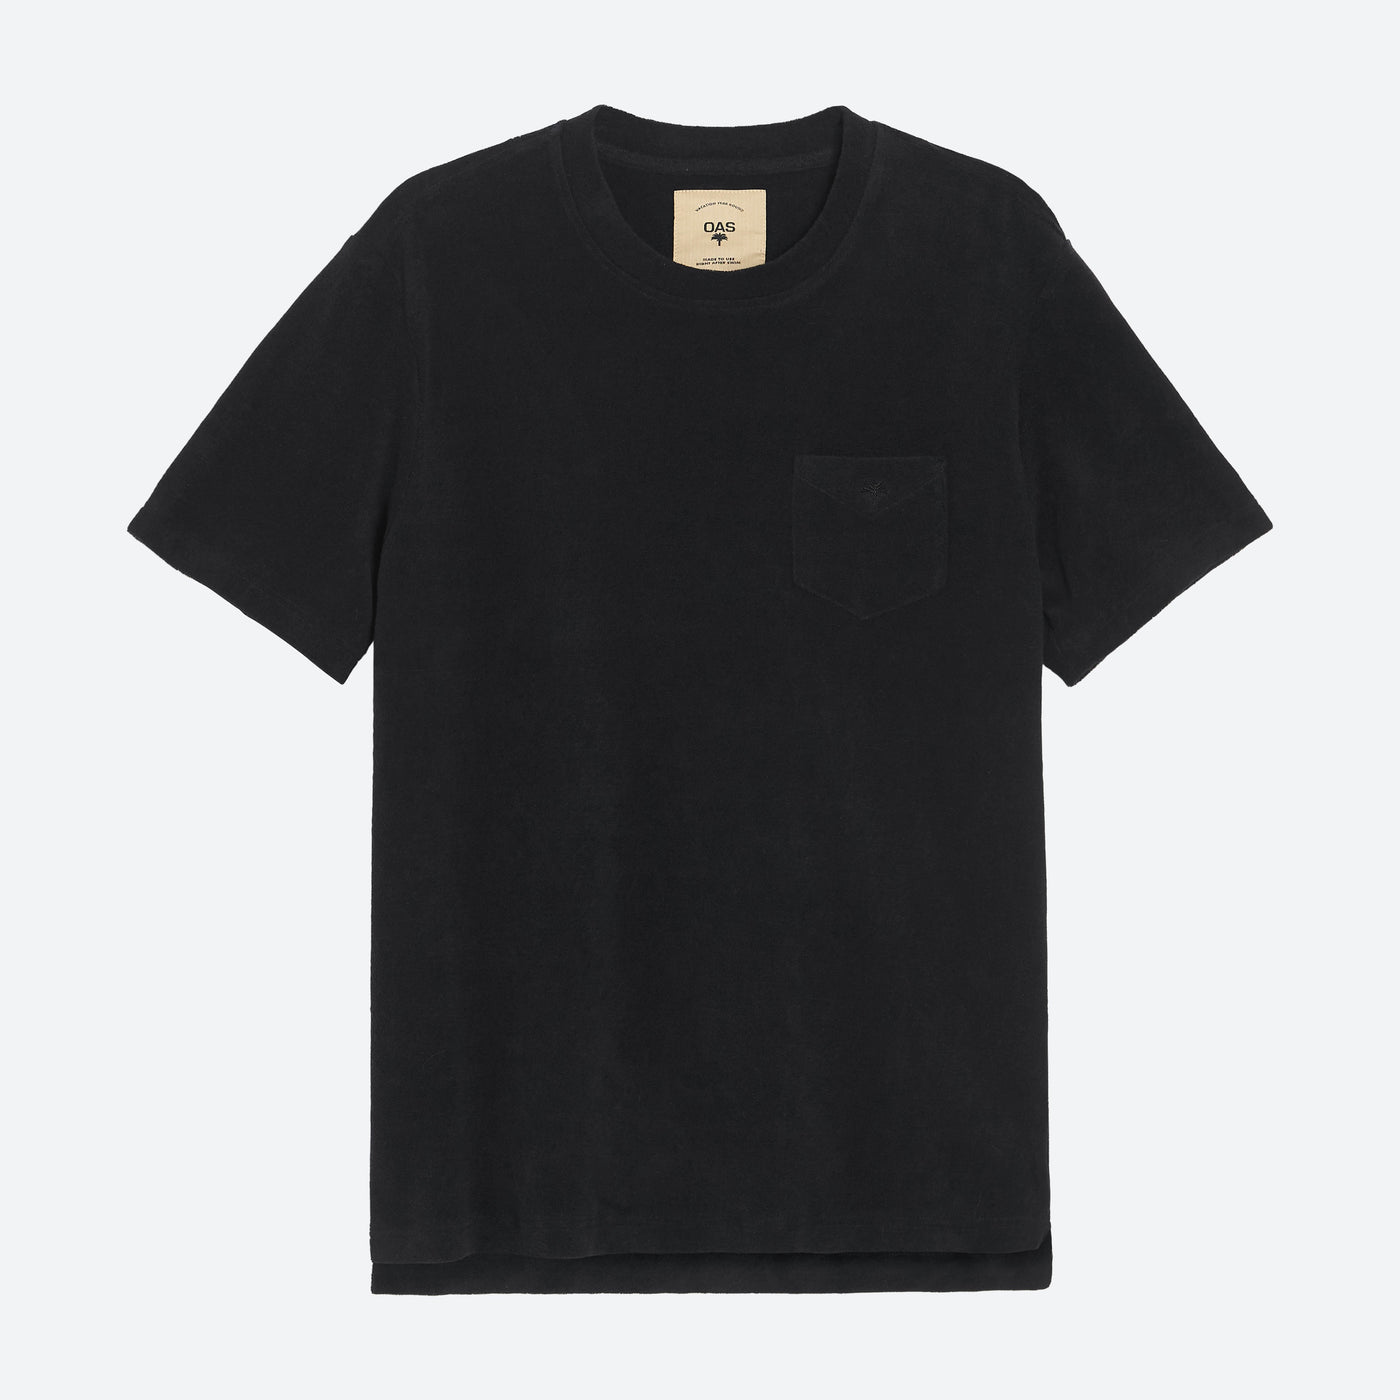 Tee terry adults black / Small